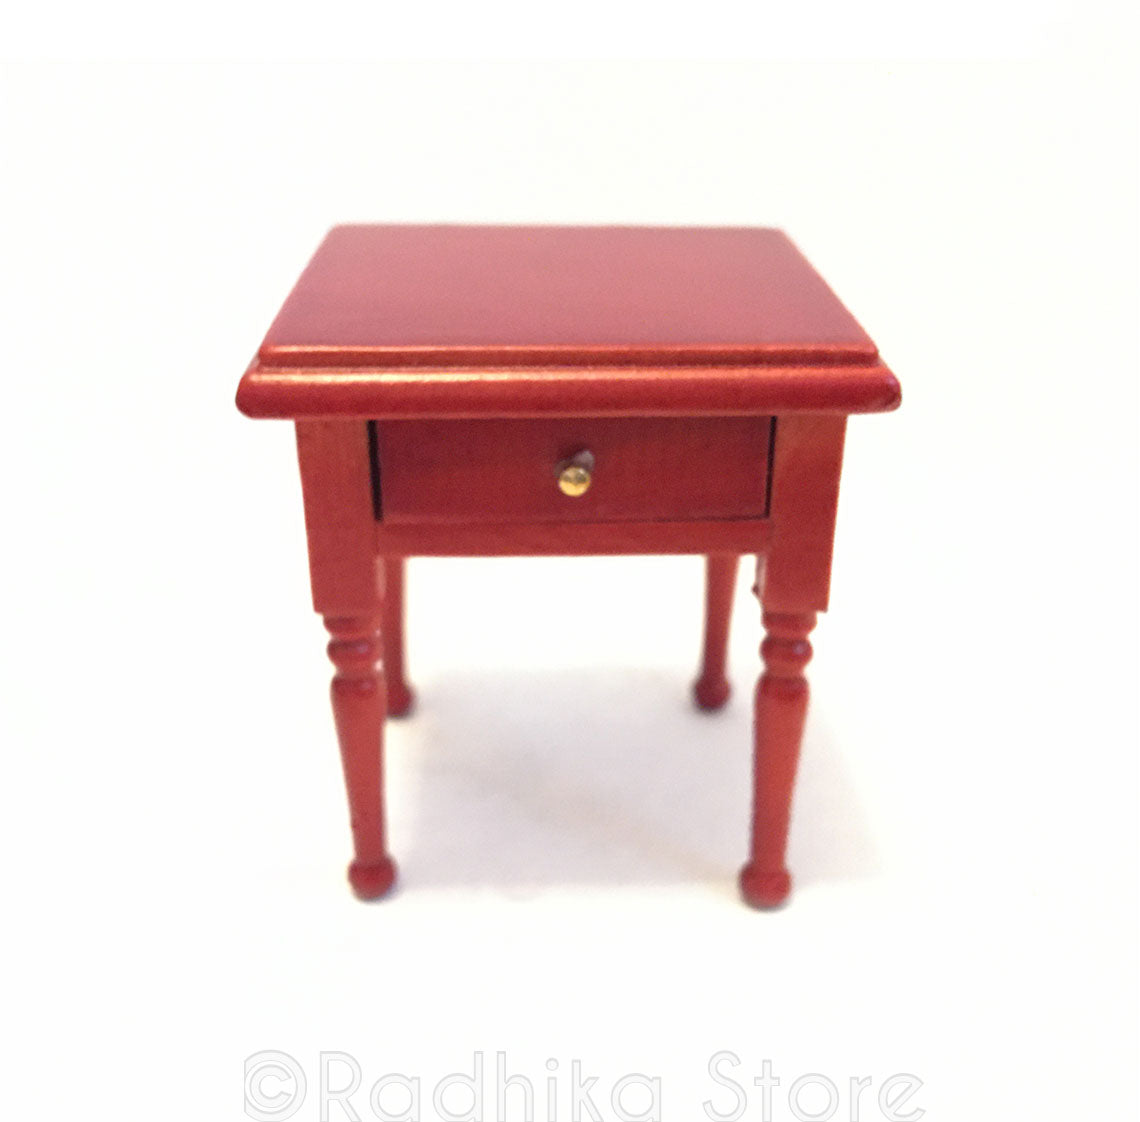 Chawki (Offering Table) or Side Table With Drawer- Cherry Finish